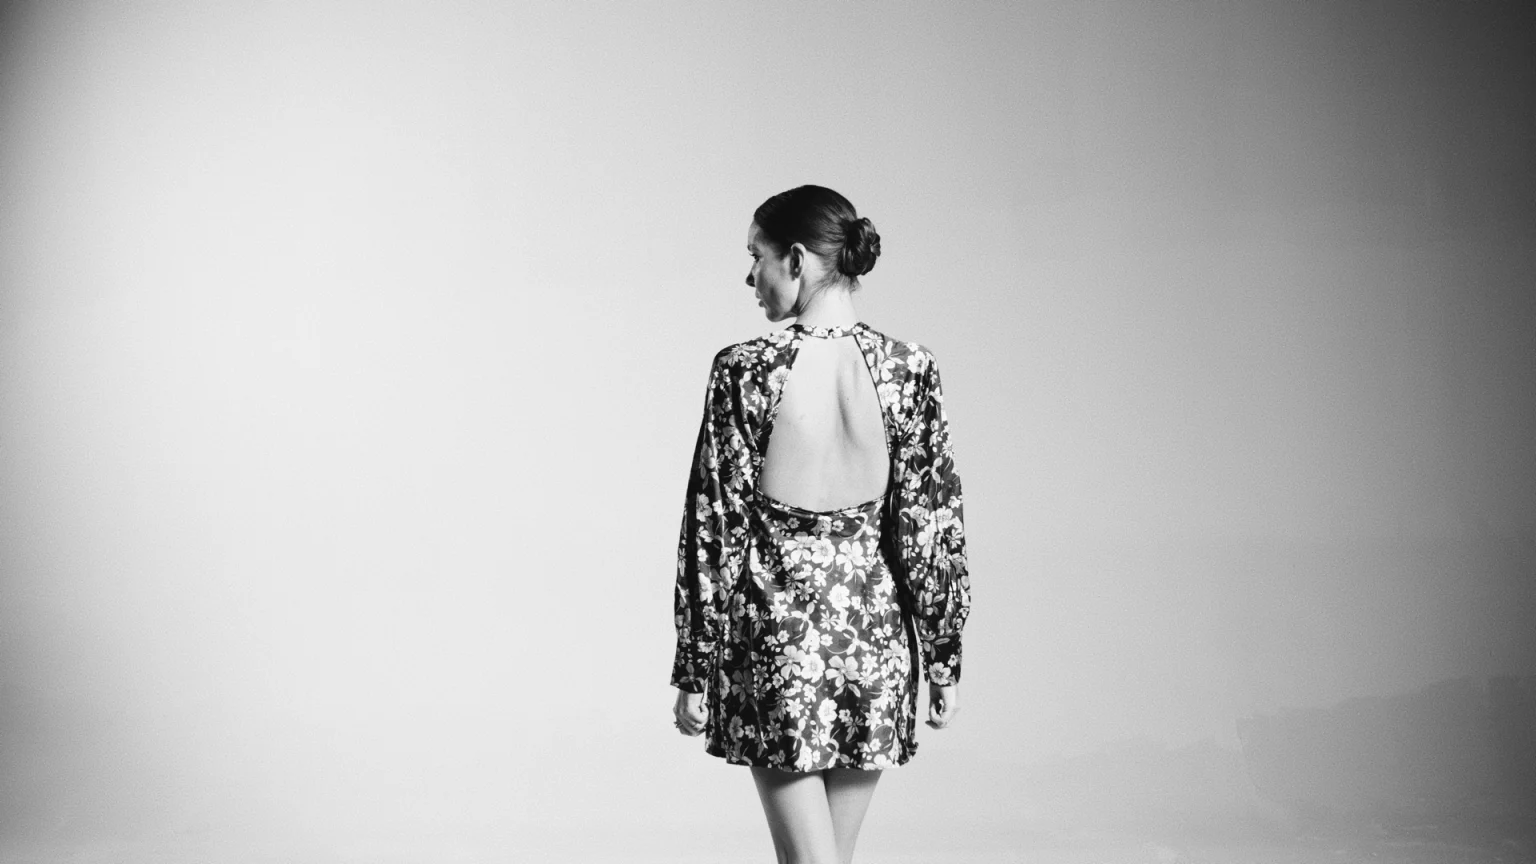 Black And White View From Behind Of Woman Wearing A Flowery Outfit